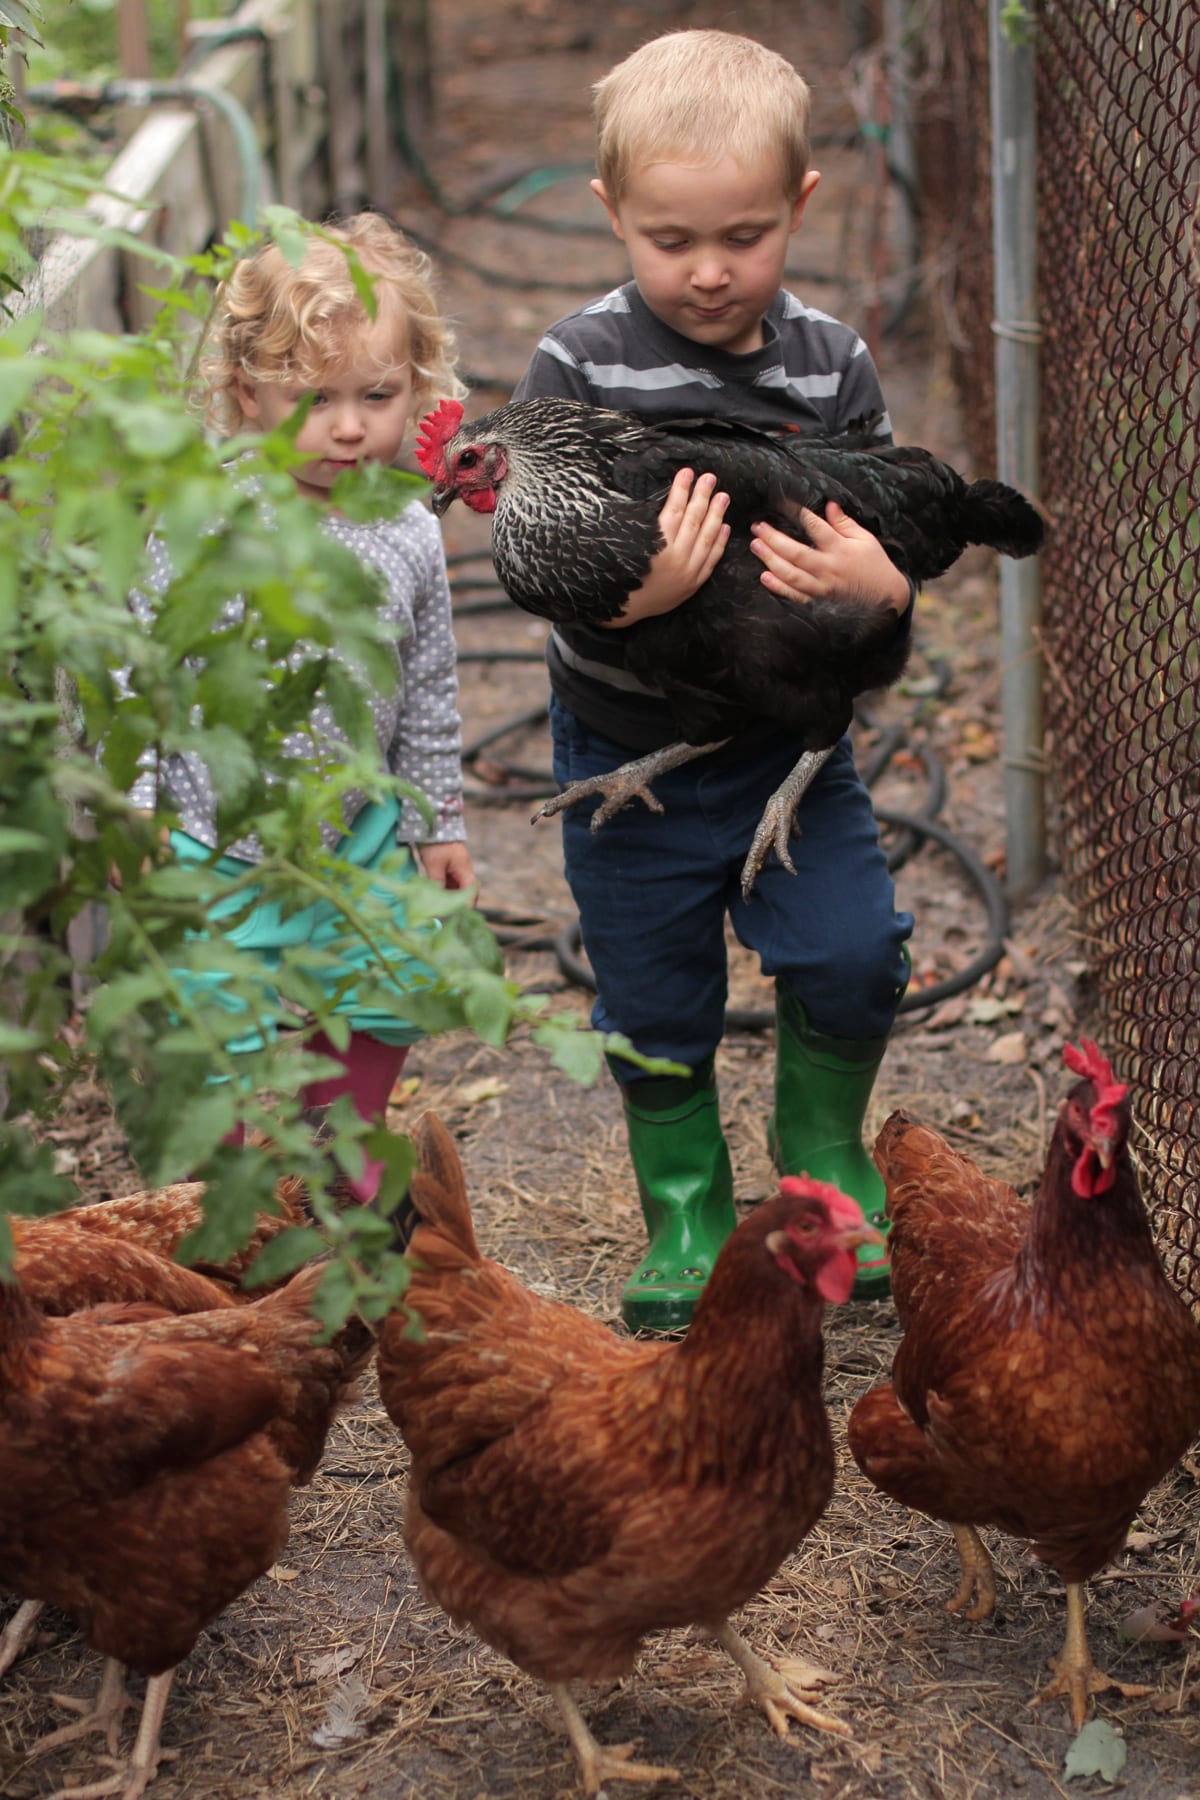 Five Reasons to Not Keep Chickens - Live Simply